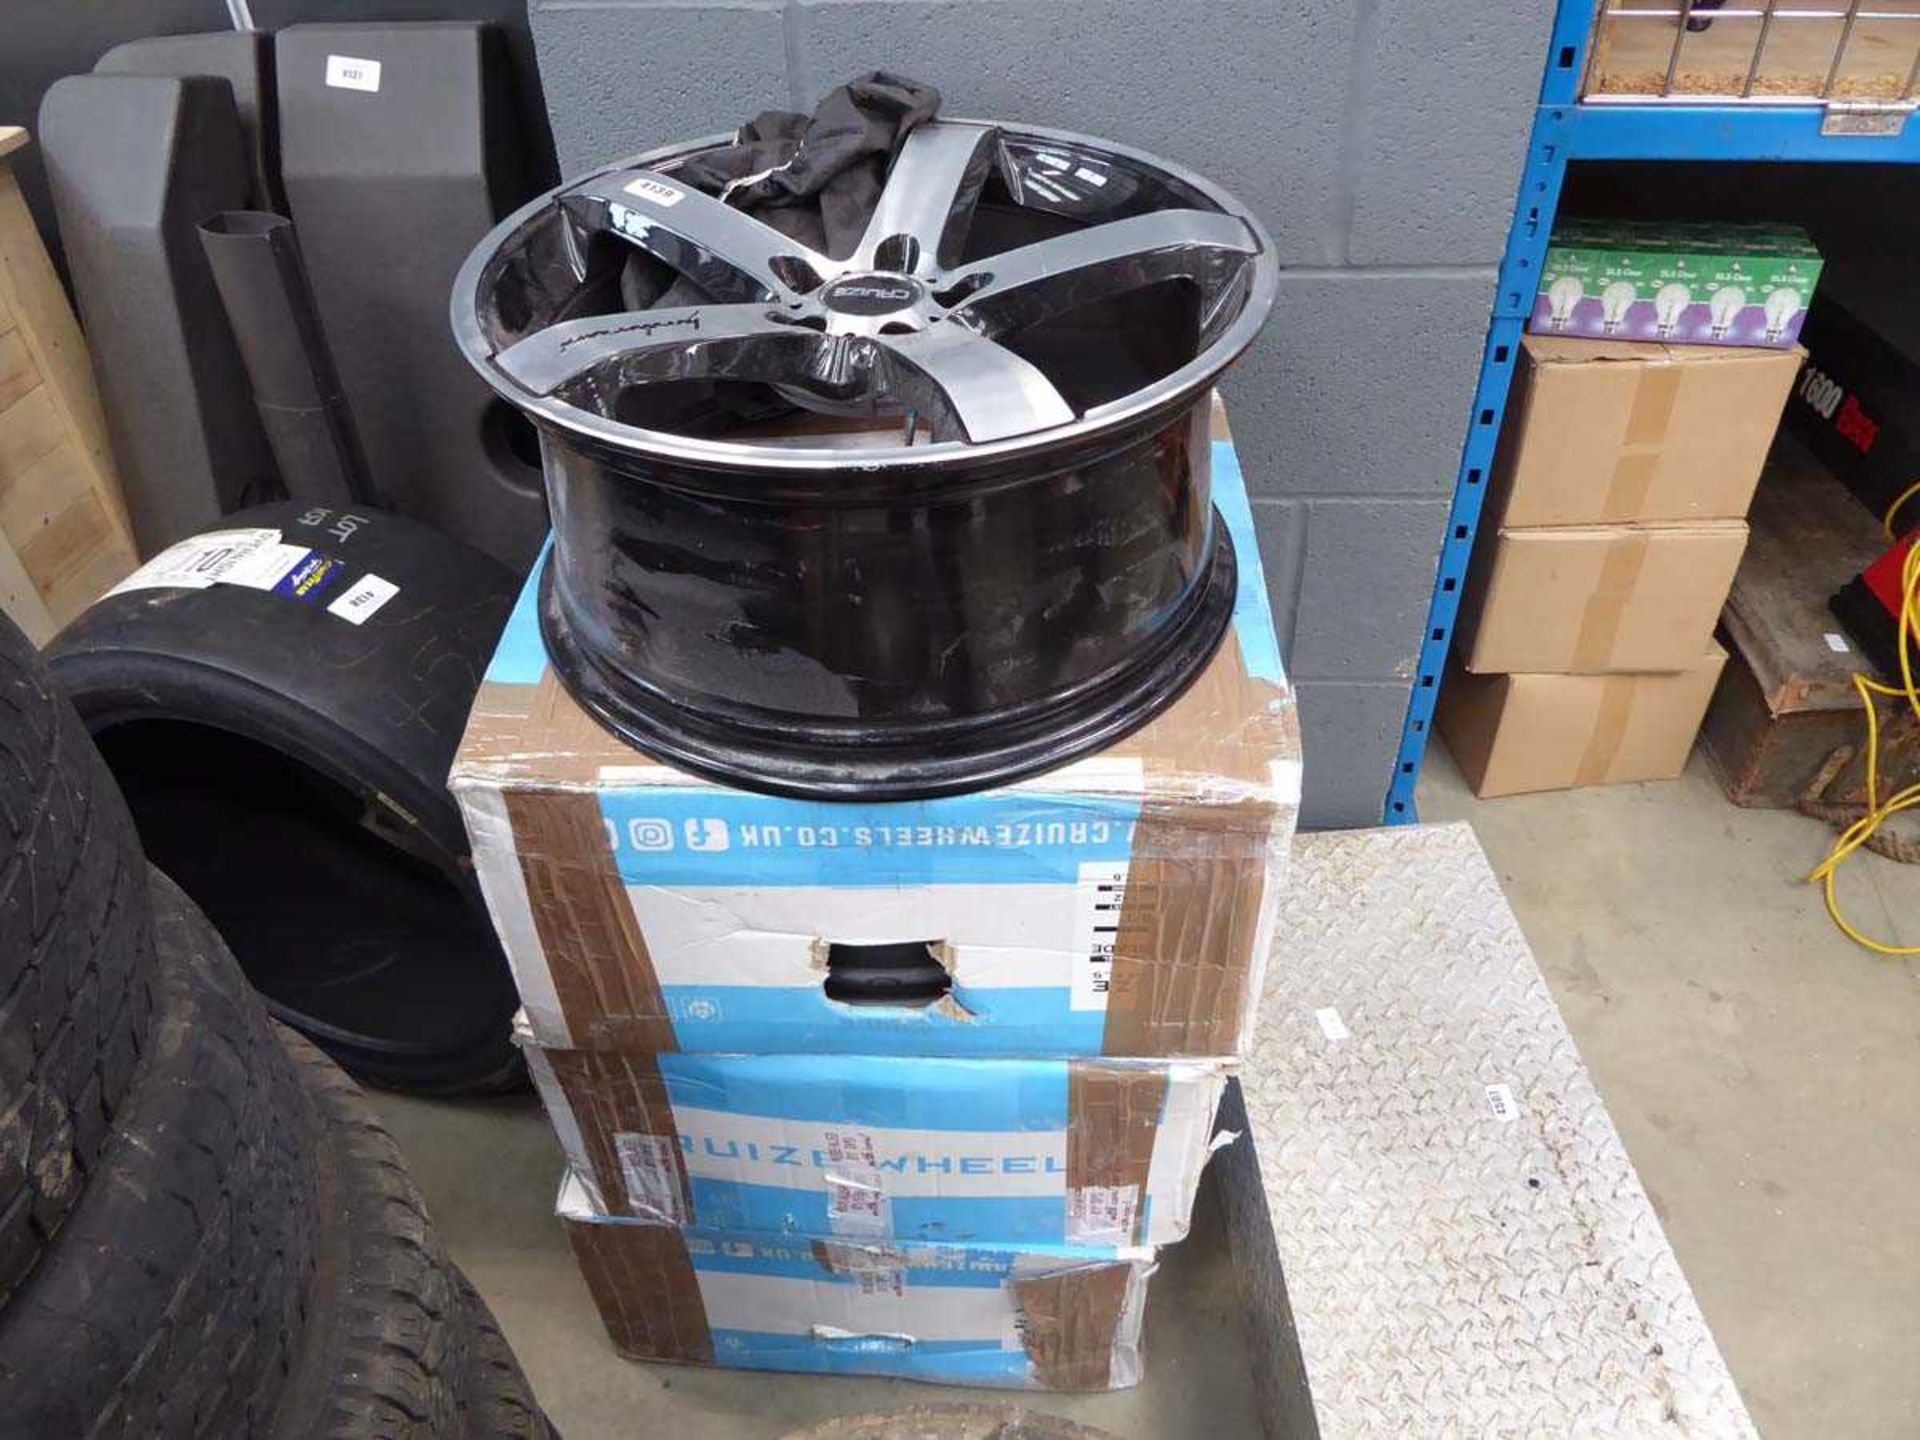 Three boxed and one unboxed Cruize alloy wheel